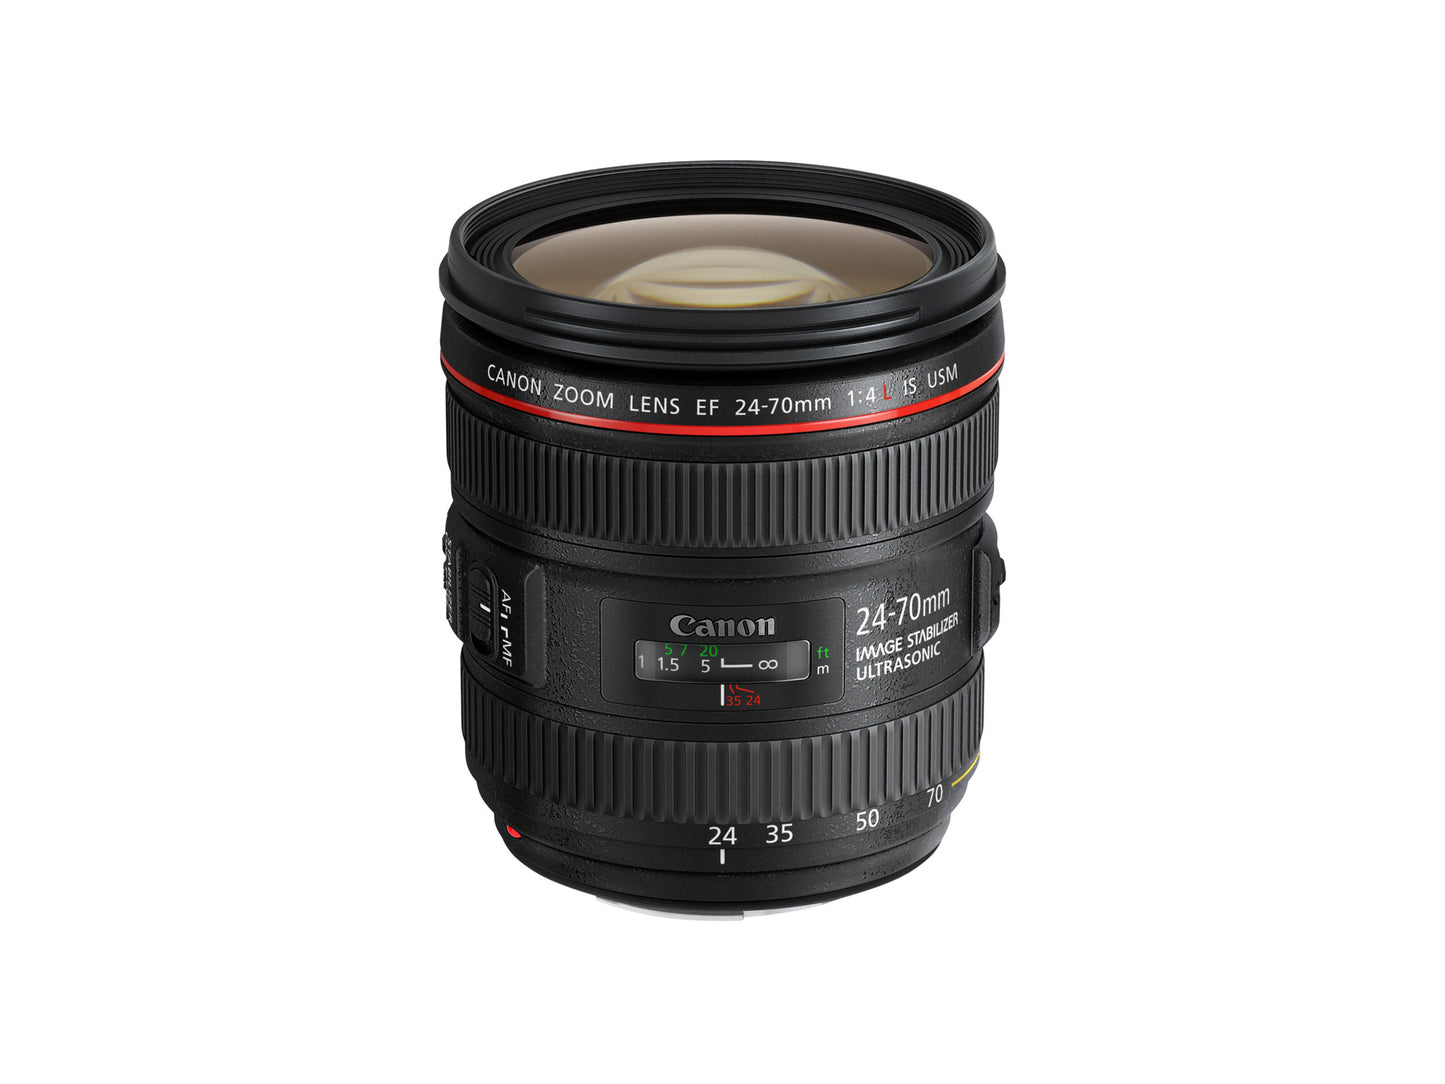 Canon - 24 mm to 70 mm - f/4 - Zoom Lens for Canon EF/EF-S